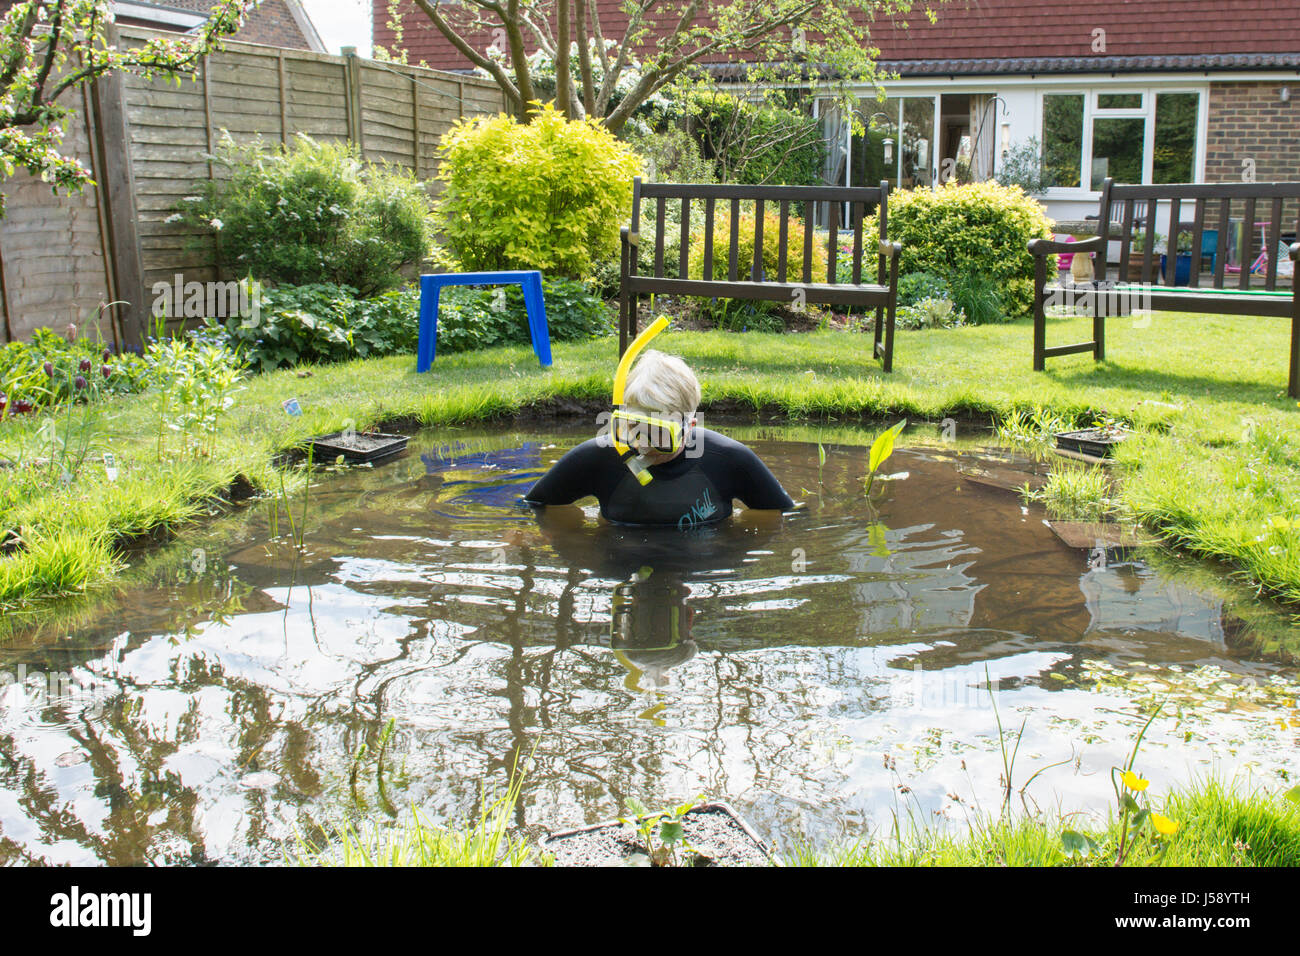 Mature woman having fun wearing wetsuit, goggles, snorkel, in small garden pond, moving pond plants. Having a laugh. Just for fun. As a joke. UK. Stock Photo